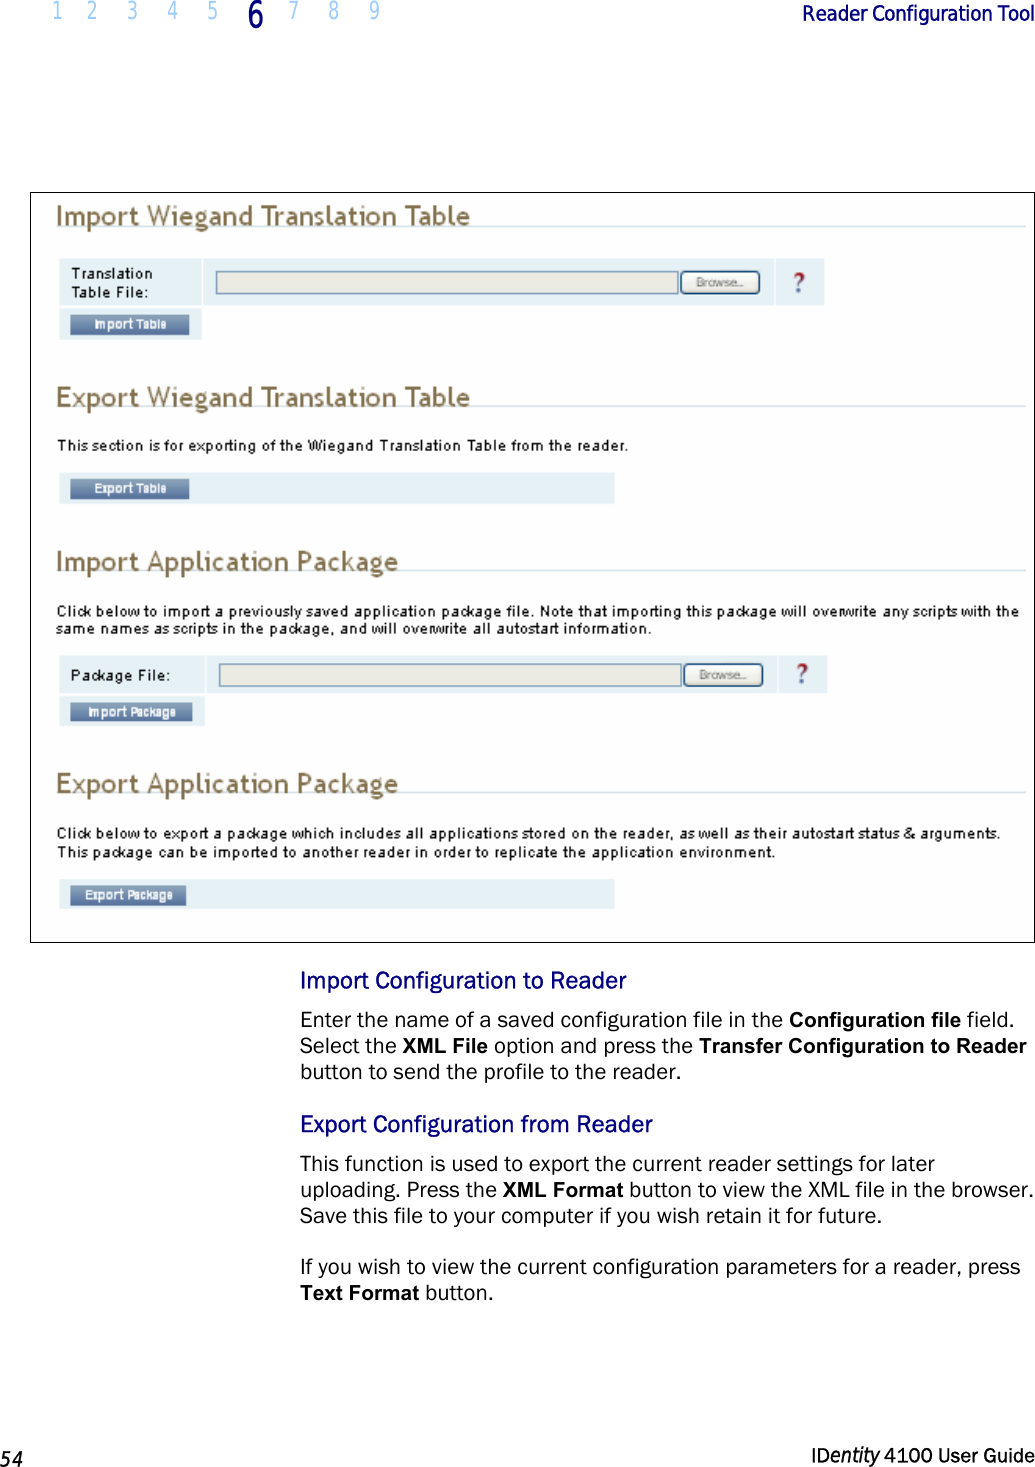  1 2  3  4 5 6 7 8 9       Reader Configuration Tool   54  IDentity 4100 User Guide    Import Configuration to Reader Enter the name of a saved configuration file in the Configuration file field. Select the XML File option and press the Transfer Configuration to Reader button to send the profile to the reader.  Export Configuration from Reader This function is used to export the current reader settings for later uploading. Press the XML Format button to view the XML file in the browser. Save this file to your computer if you wish retain it for future. If you wish to view the current configuration parameters for a reader, press Text Format button. 